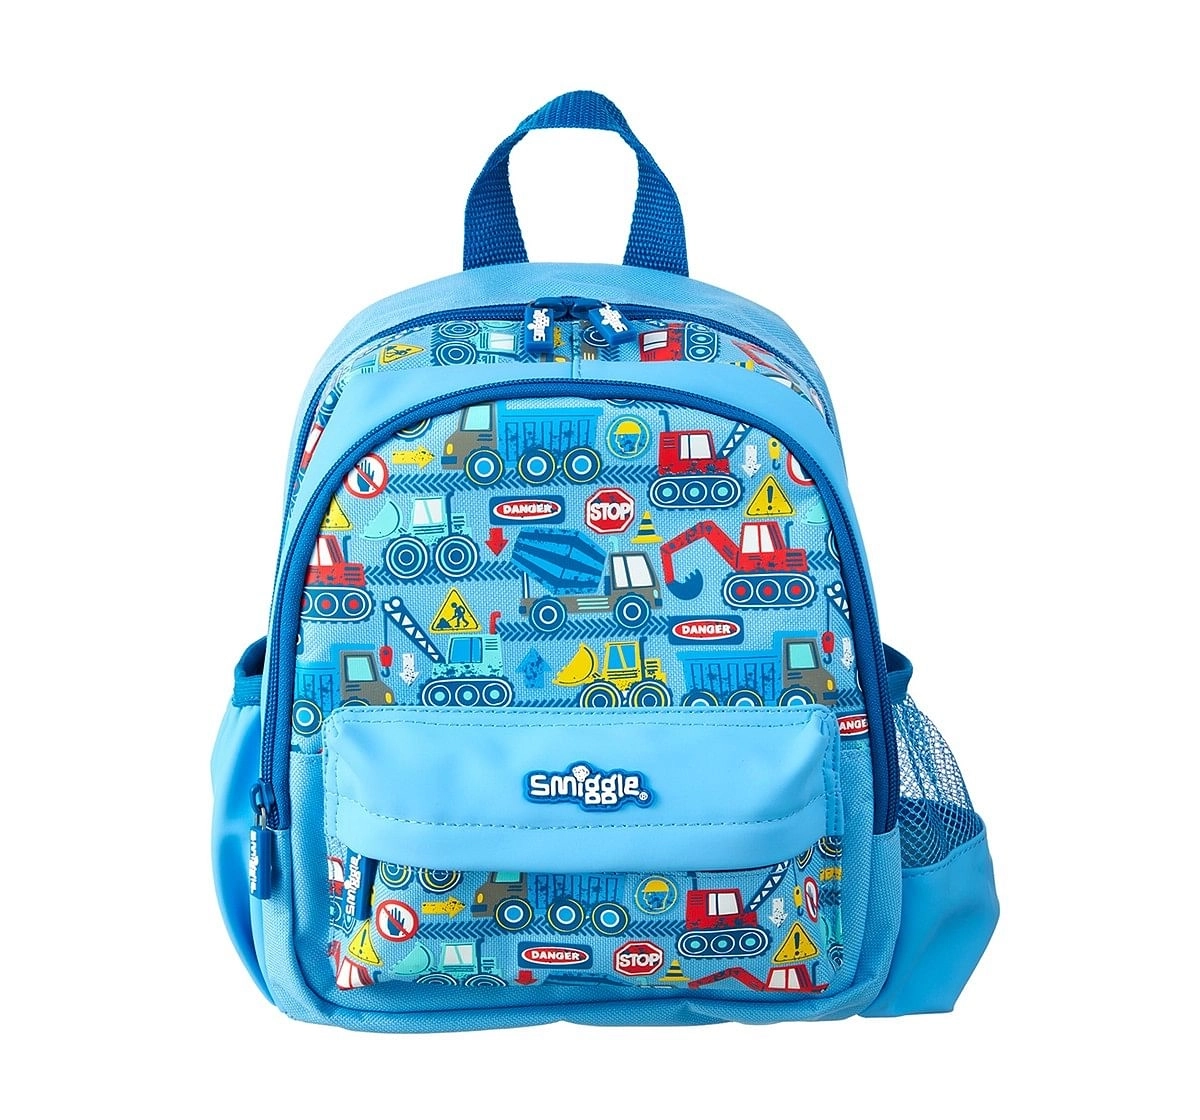 AN 334 R Backpack Bag Manufacturer Supplier from Chennai India